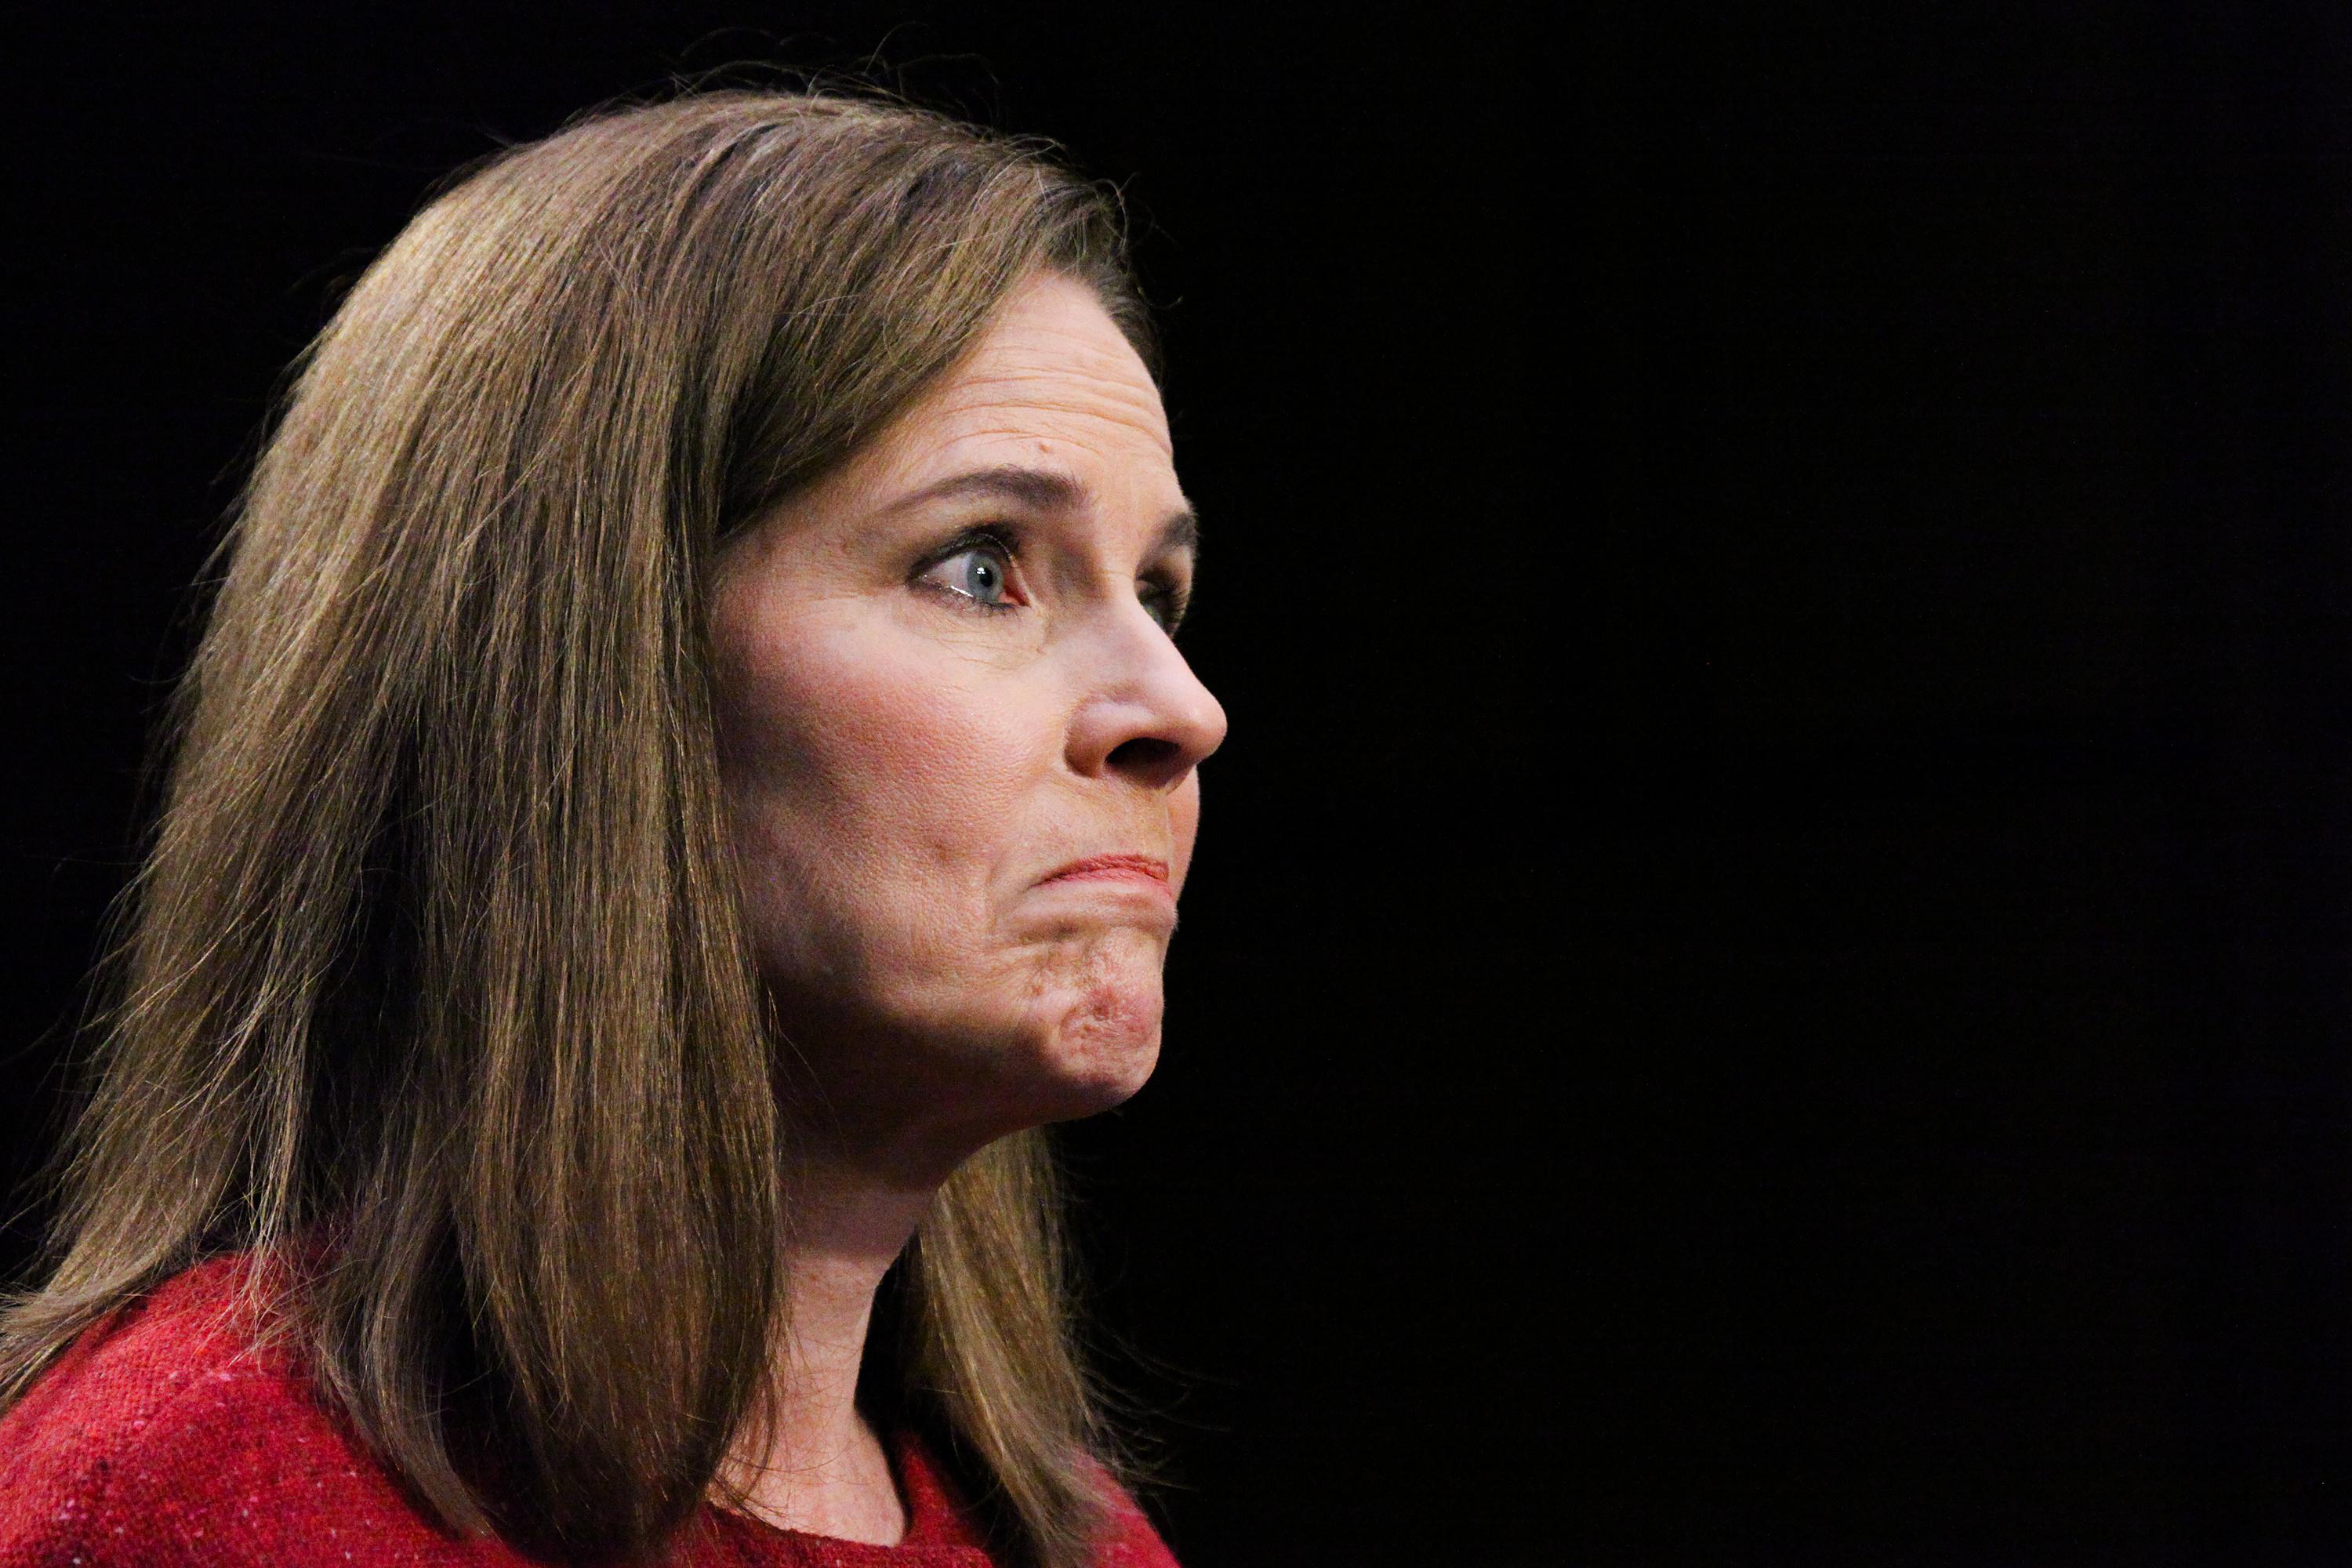 Supreme Court nominee Judge Amy Coney Barrett, from the side, frowning.